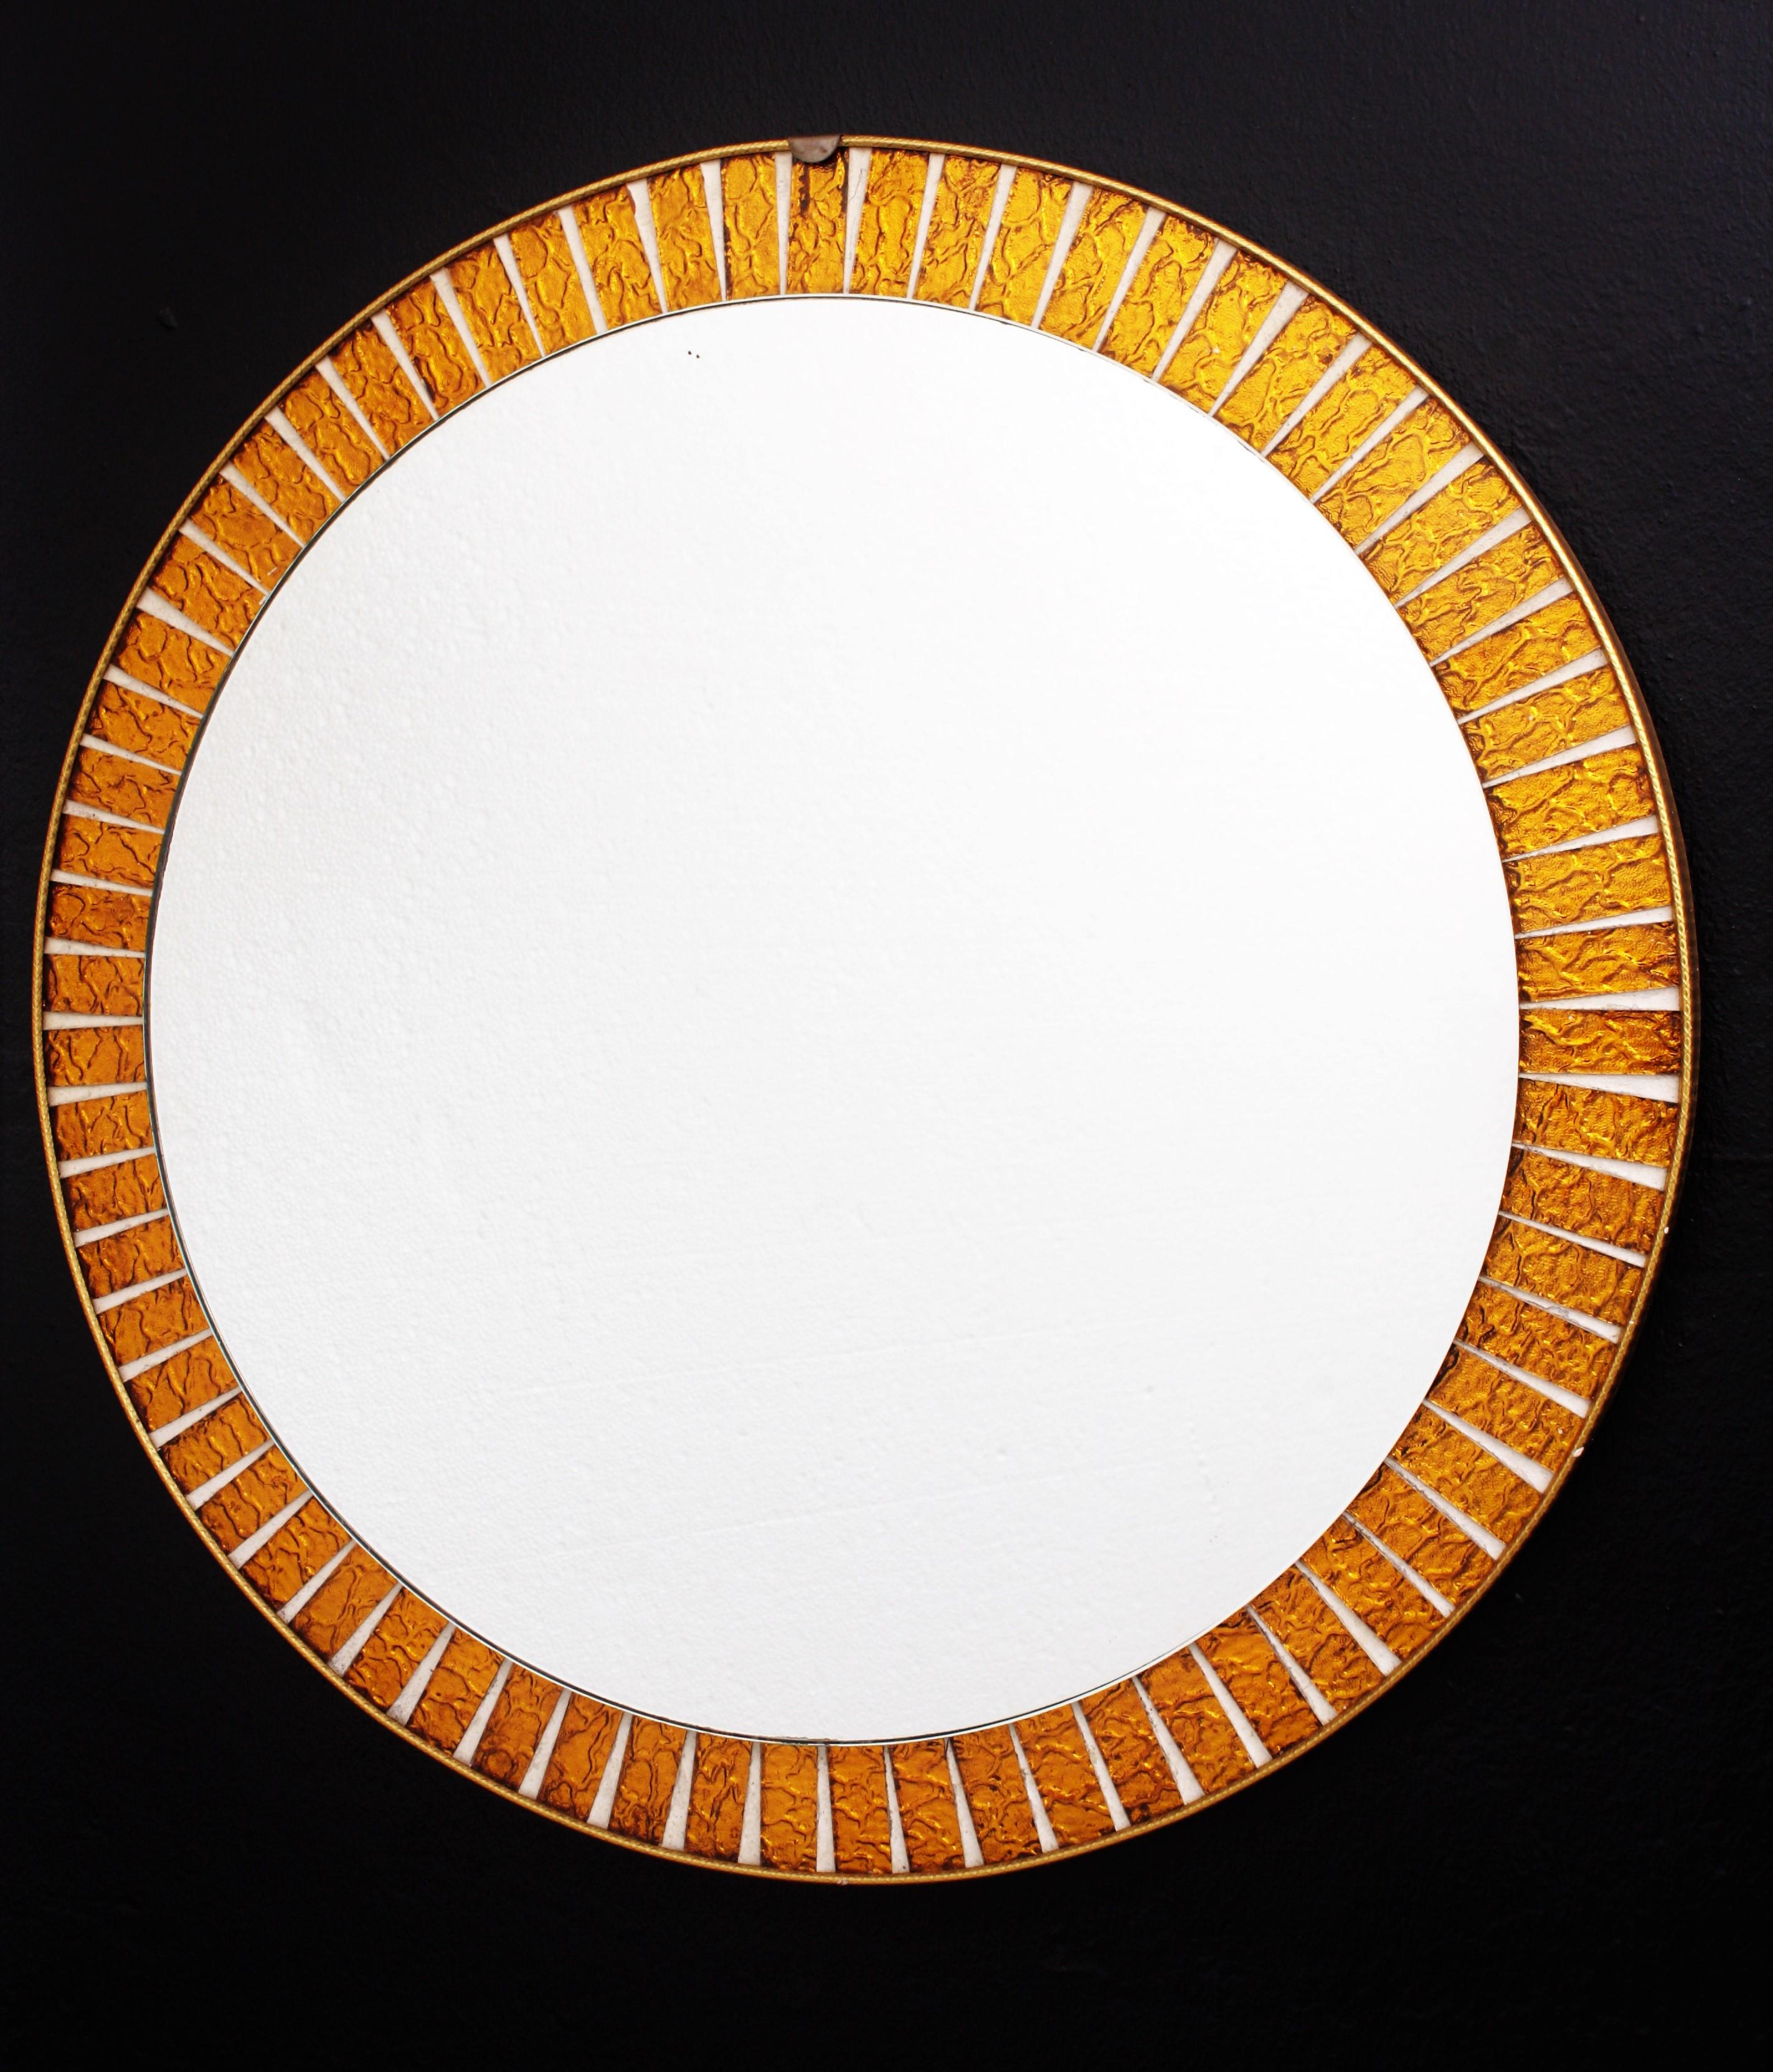 Eye-catching Spanish modern round wall mirror framed by handcut iridescent orange textured glasses. Manufactured in Spain, 1960s.
This colorful wall mirror will be a nice choize to add a midcentury taste to any interior design.
Measures: 60 cm